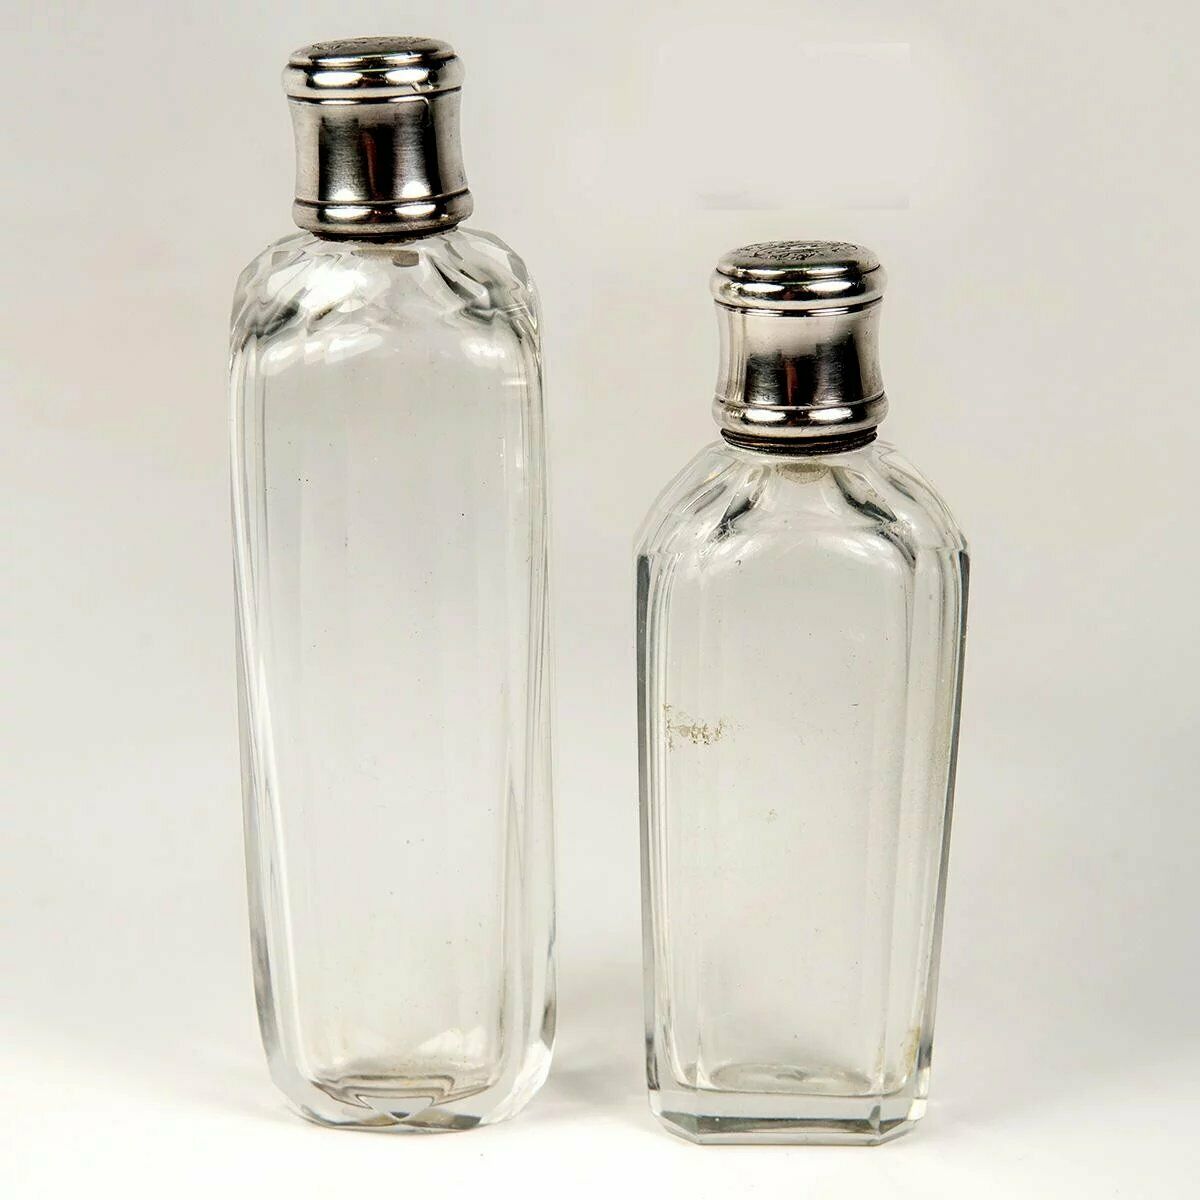 Pair (2) Antique French Sterling Silver & Cut Glass Flasks, Liqueur or Cologne